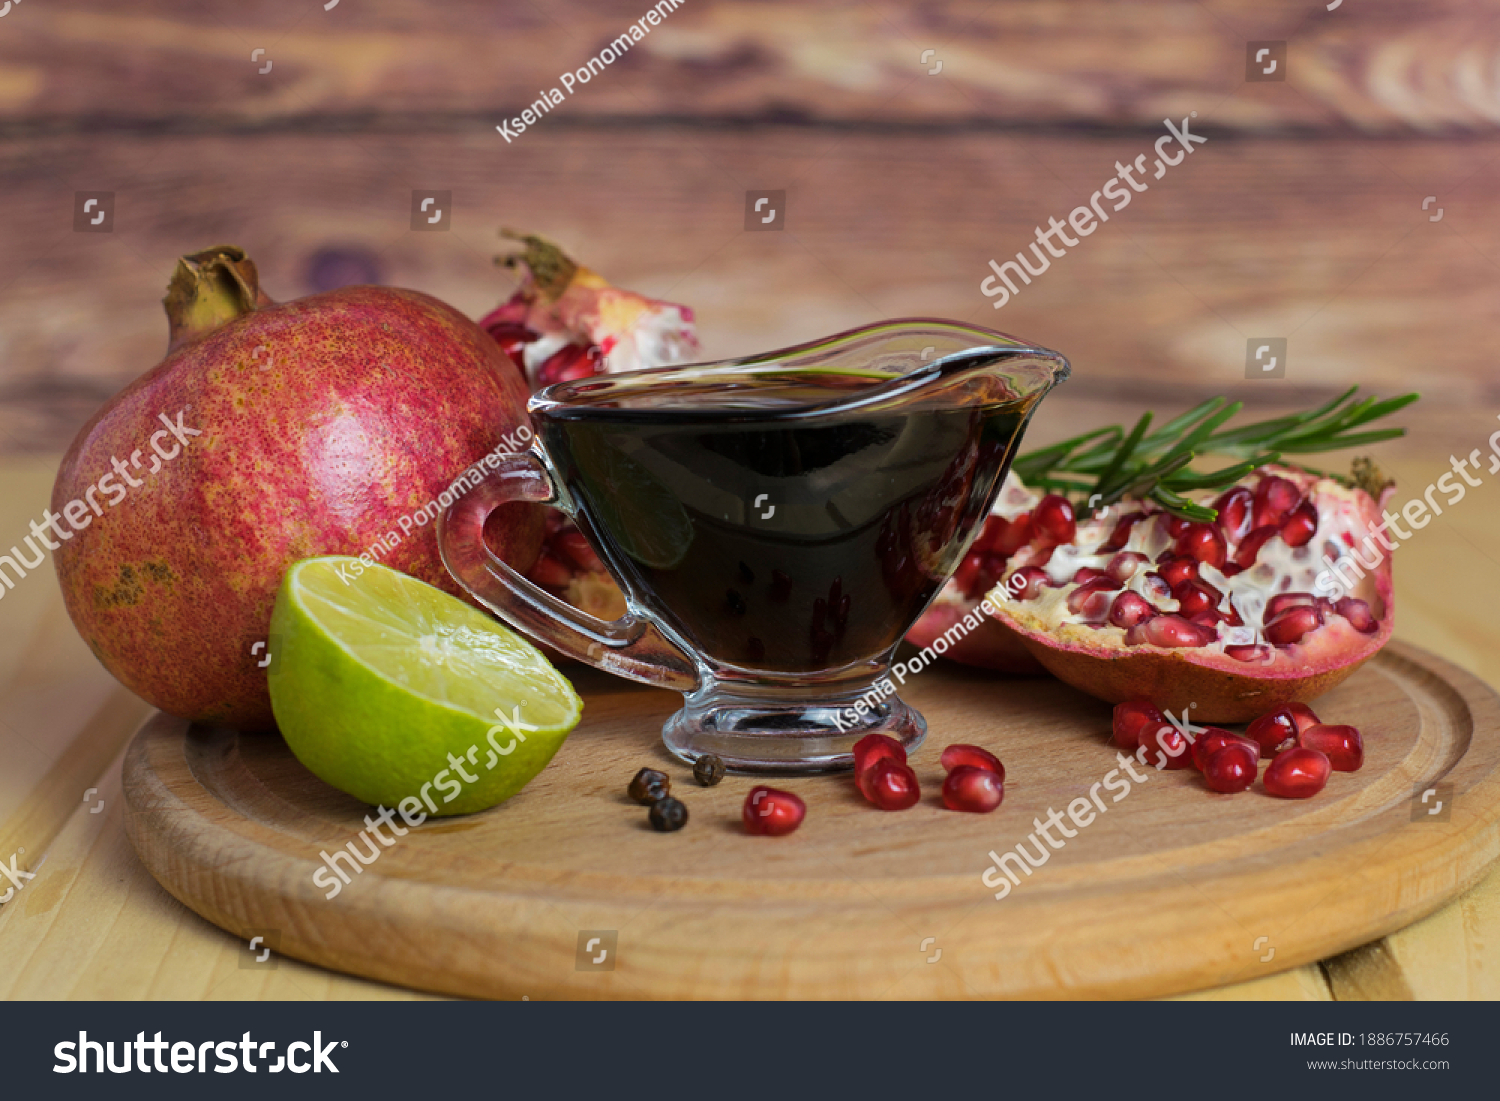 Pomegranate sauce in a gravy boat on a wooden board. Nearby are pomegranate, lime, pomegranate seeds. Narsharab, meat sauce, pomegranate sauce. #1886757466